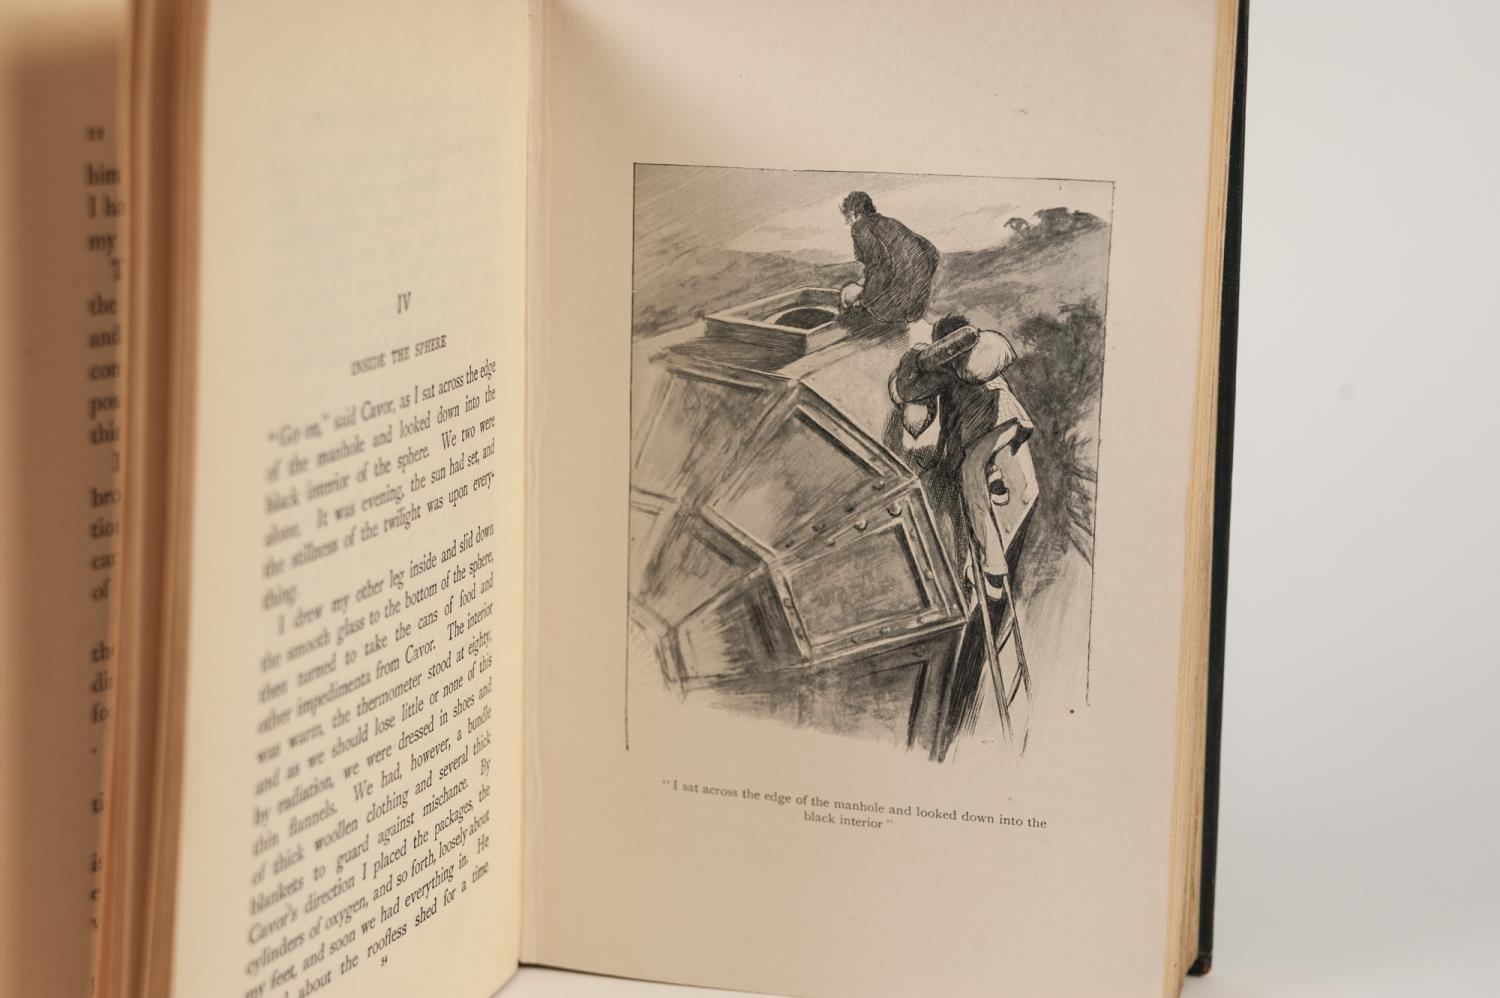 H G WELLS- The First Men in the Moon, published by George Newnes, Limited 1901, 1st Edition with - Image 6 of 6